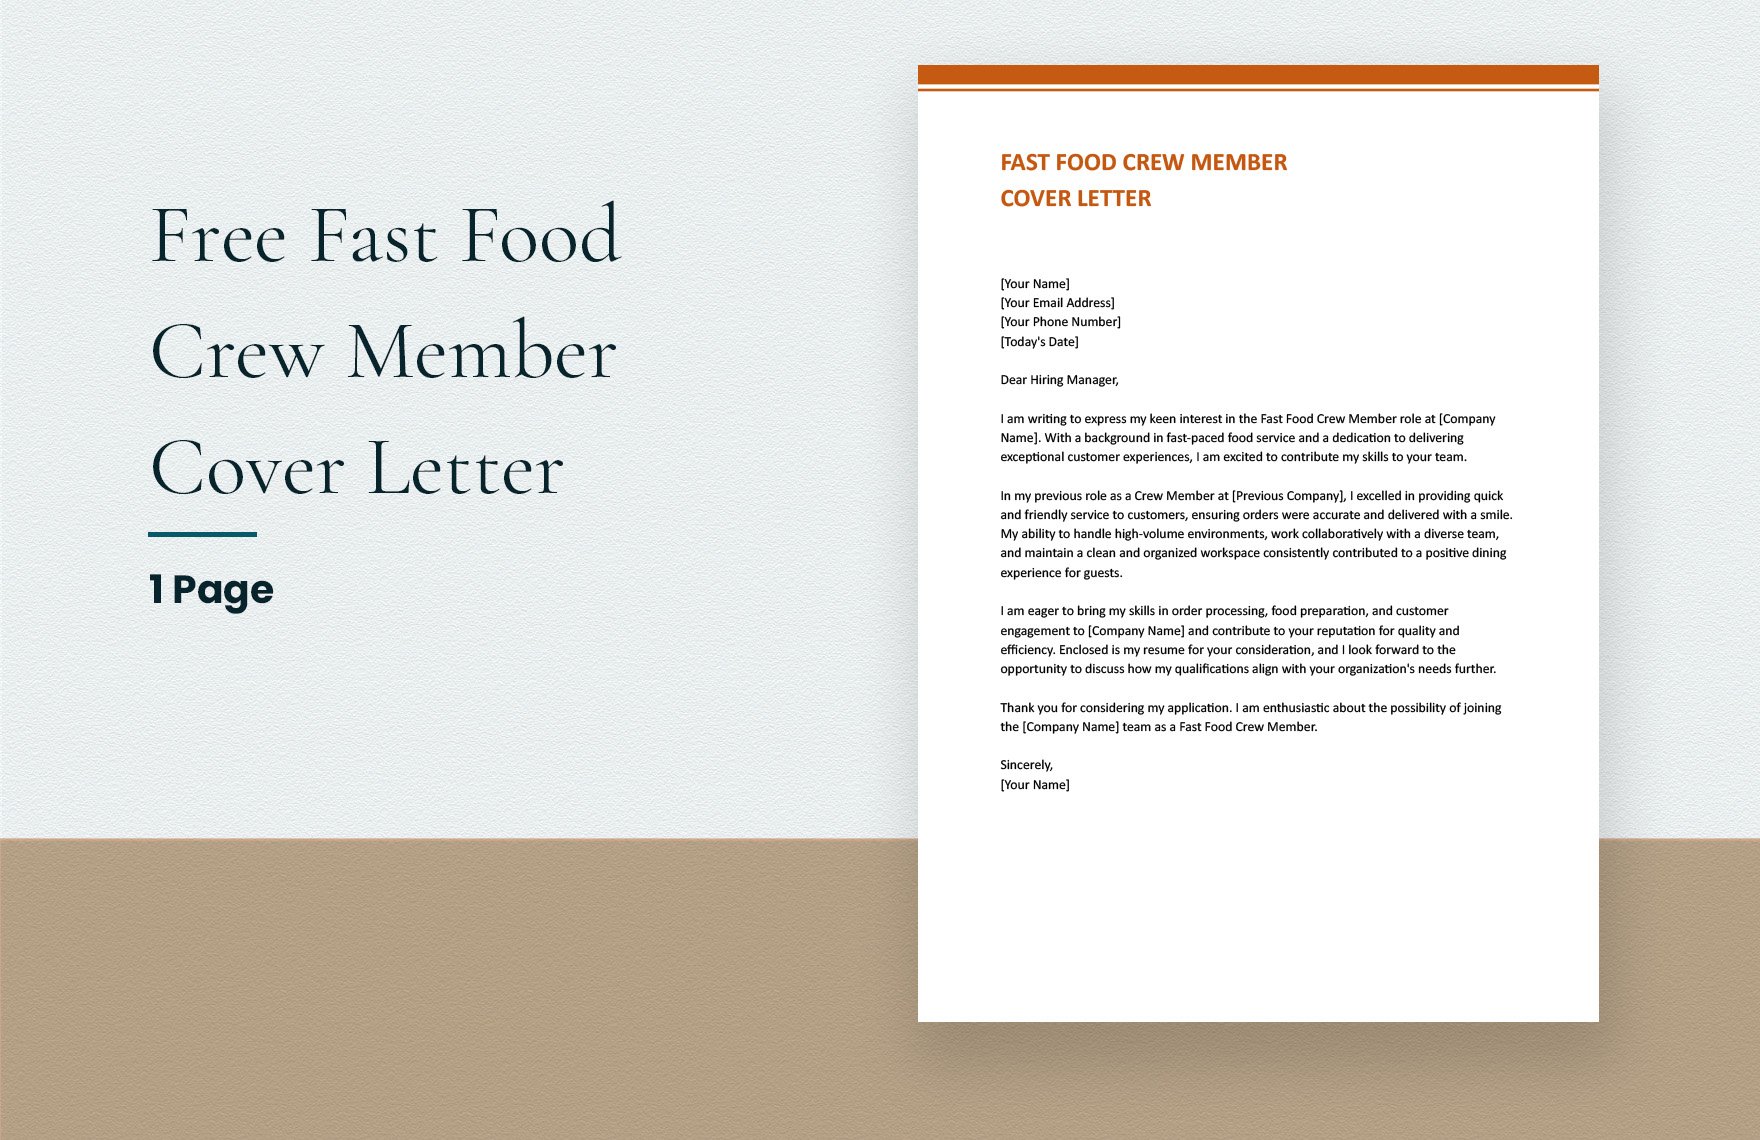 Fast Food Crew Member Cover Letter